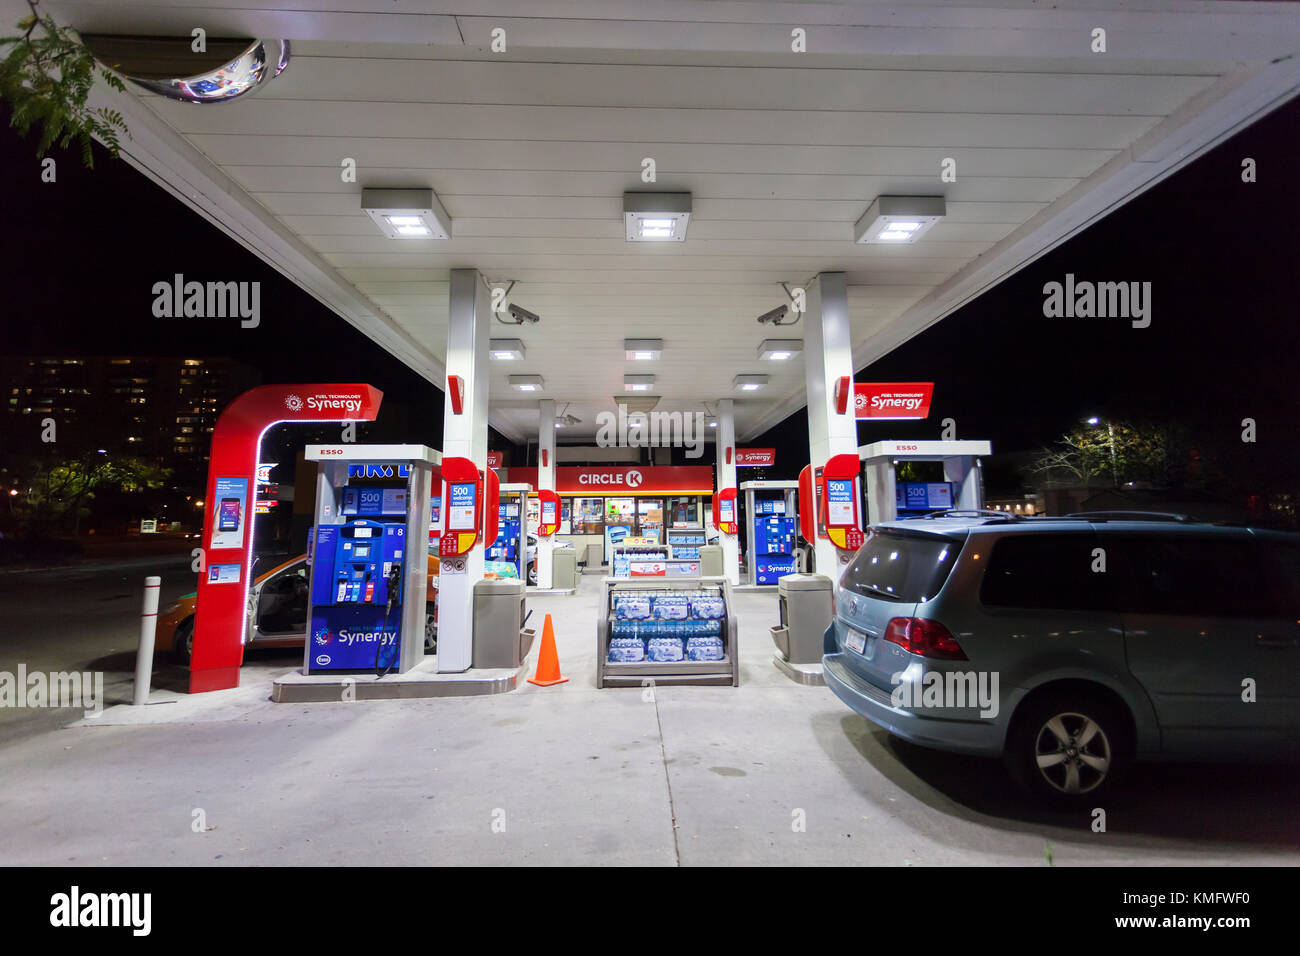 Toronto, Canada - Oct 19, 2017: Fuel pumps at an Esso gas station at night Stock Photo